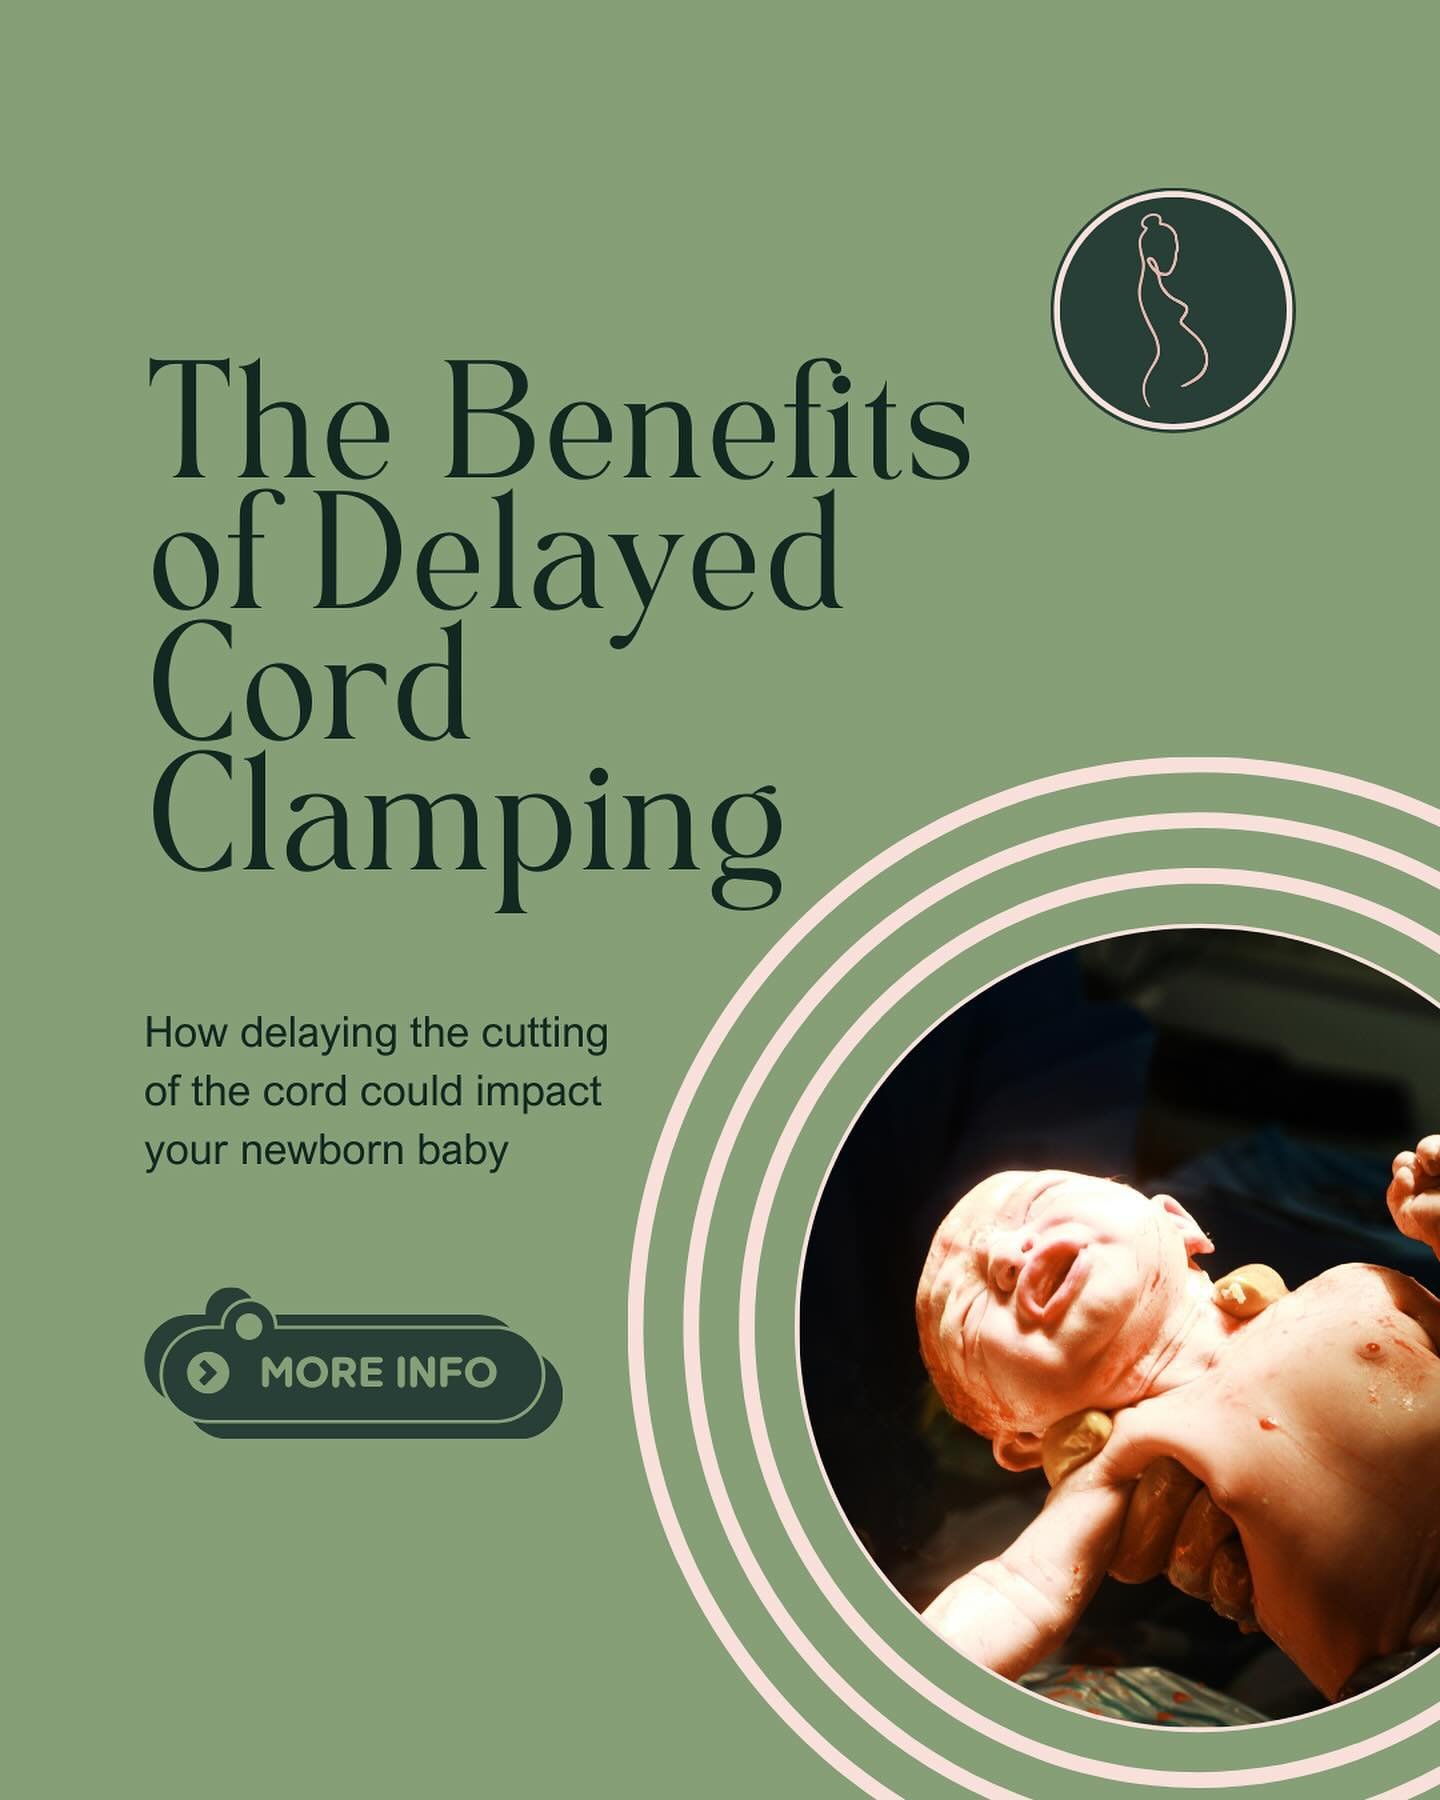 🌟 Have you ever heard about delayed cord clamping?🌟

It&rsquo;s something that often gets overlooked or not discussed enough during pregnancy and childbirth. I remember when I had my babies, it was never mentioned by the midwives.

Delayed cord cla